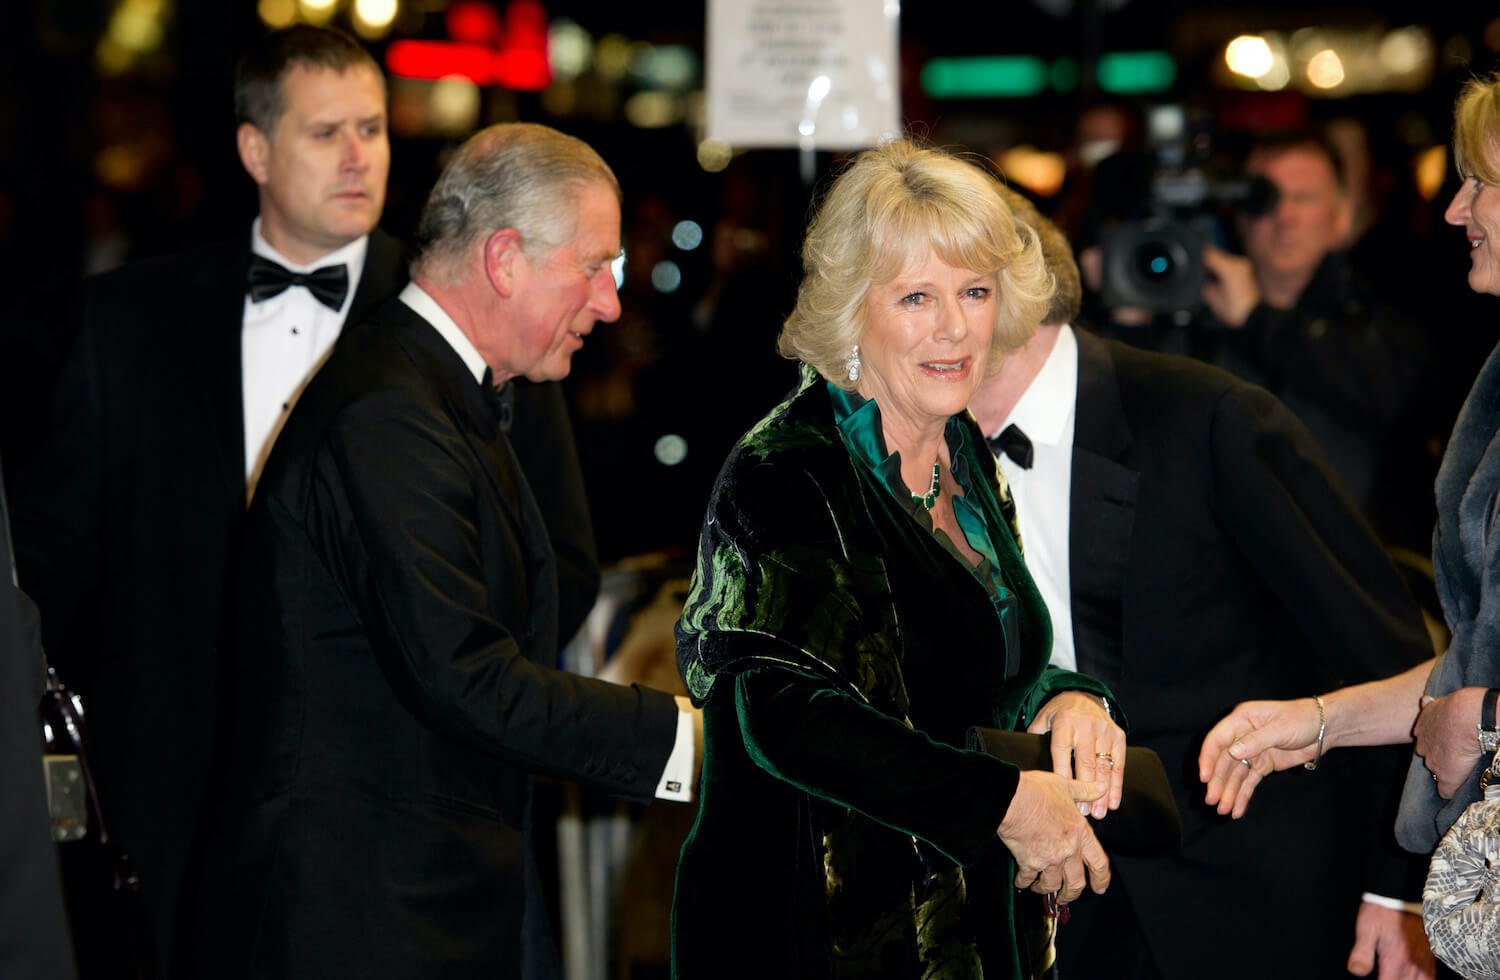 King Charles dressed in a tux walks behind Camilla Parker Bowles wearing a green gown